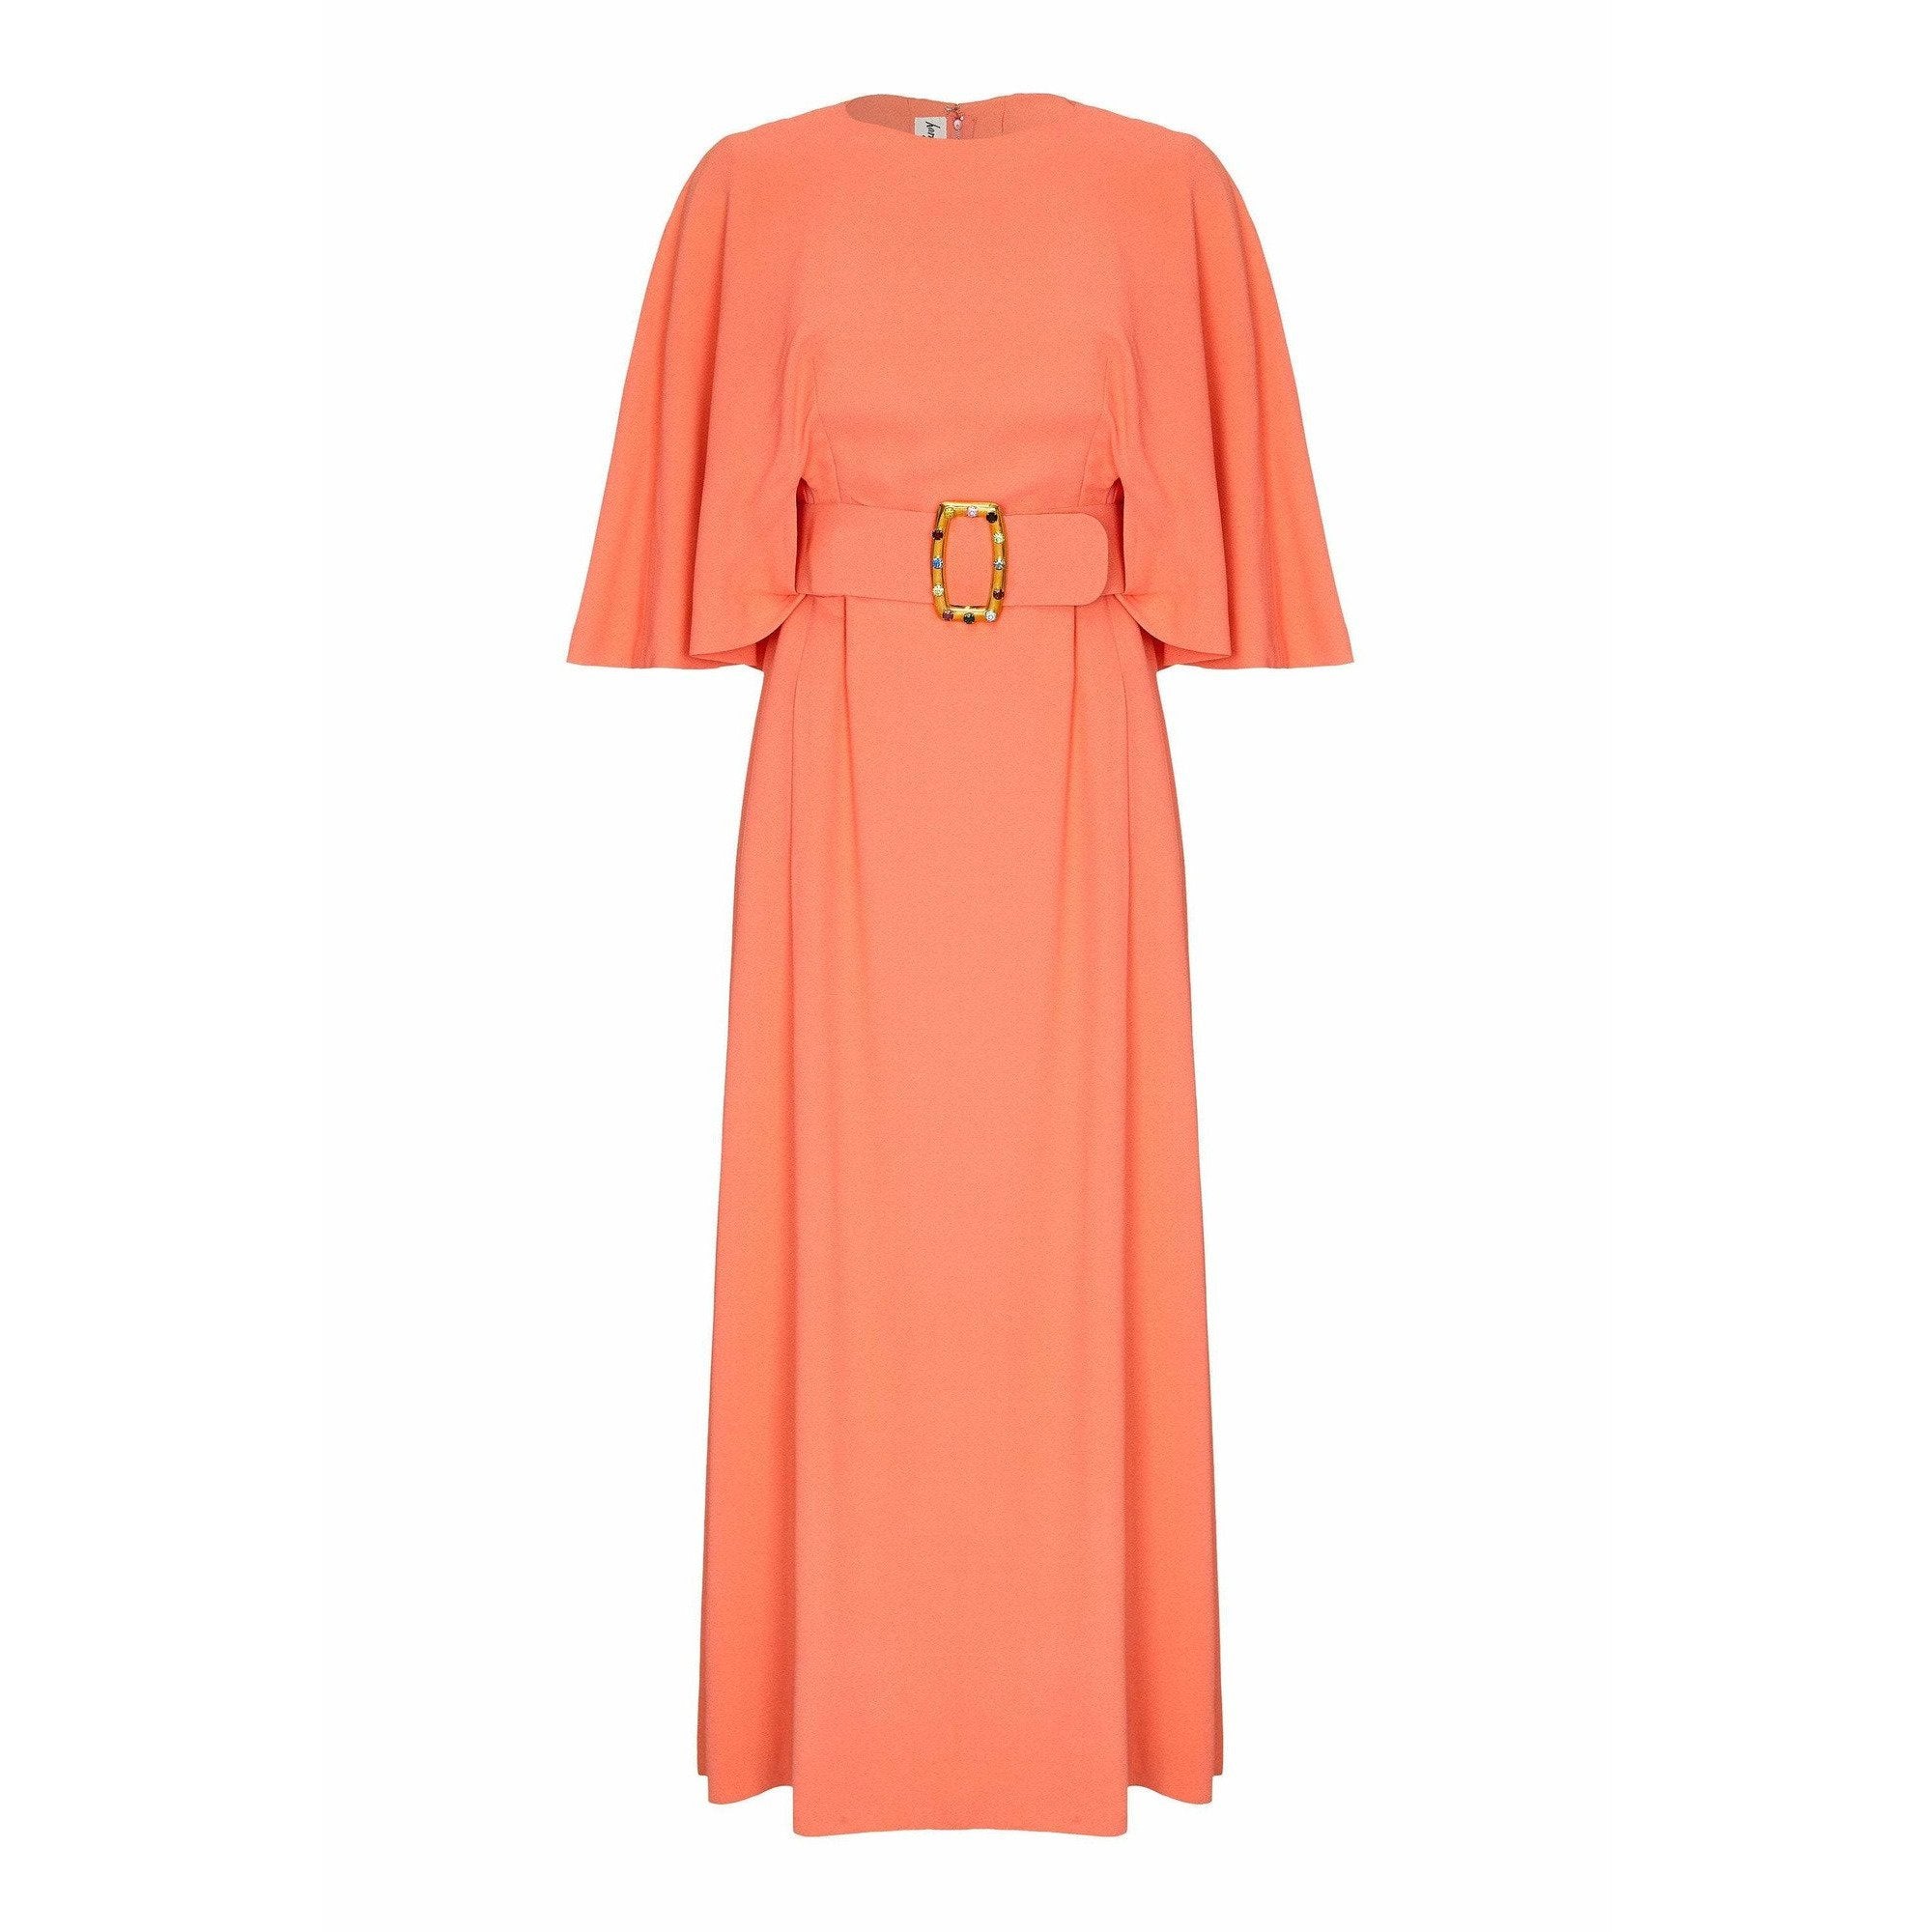 ARCHIVE - Harry B Popper 1960s Peach Maxi Dress with Cape and Jewelled Belt